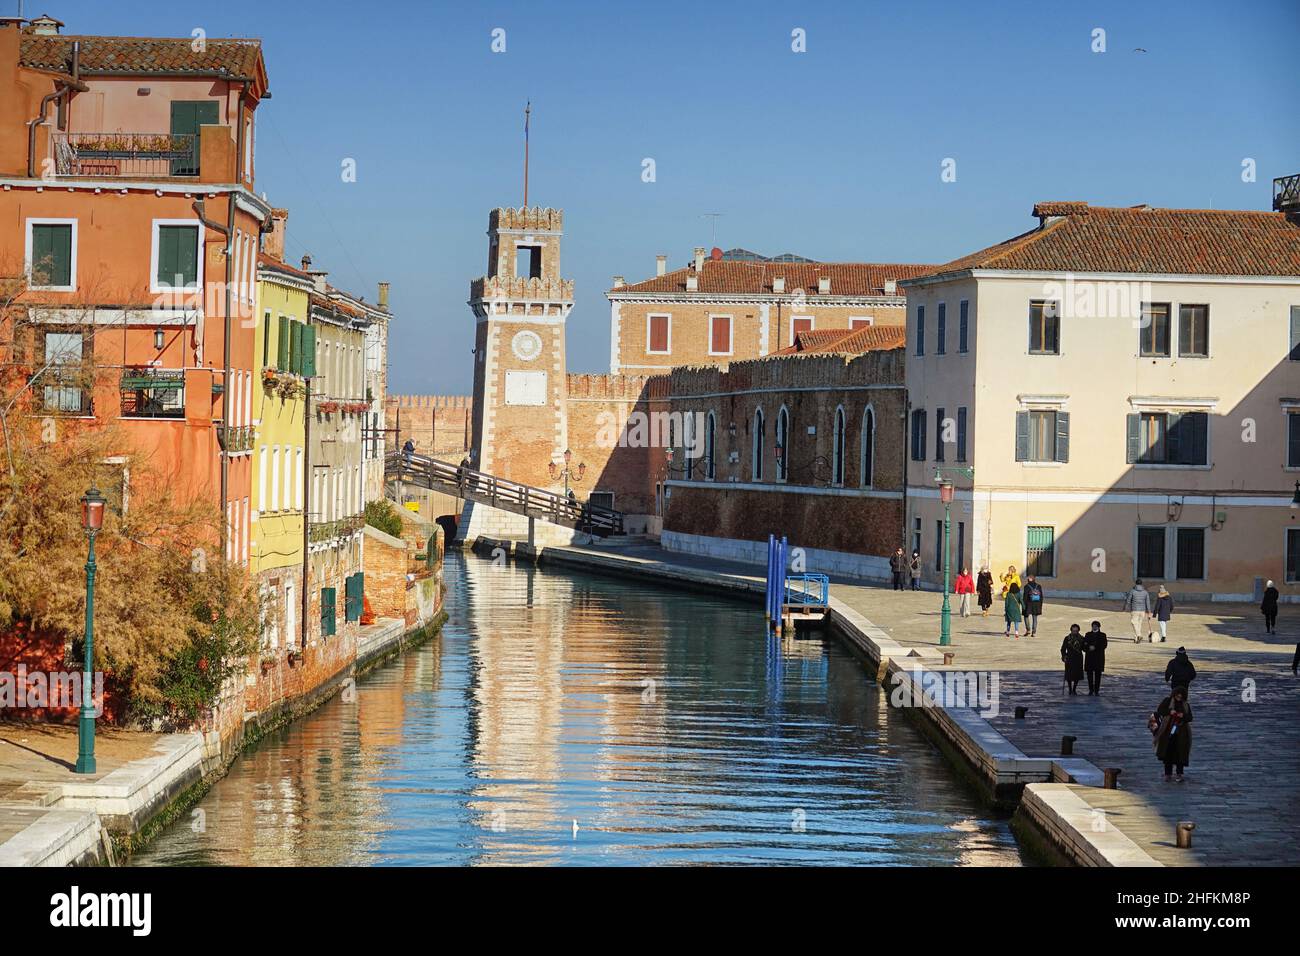 One of the canals in Venice and the Arsenal Tower in the distance.  Venice, Italy - January 2022 Stock Photo